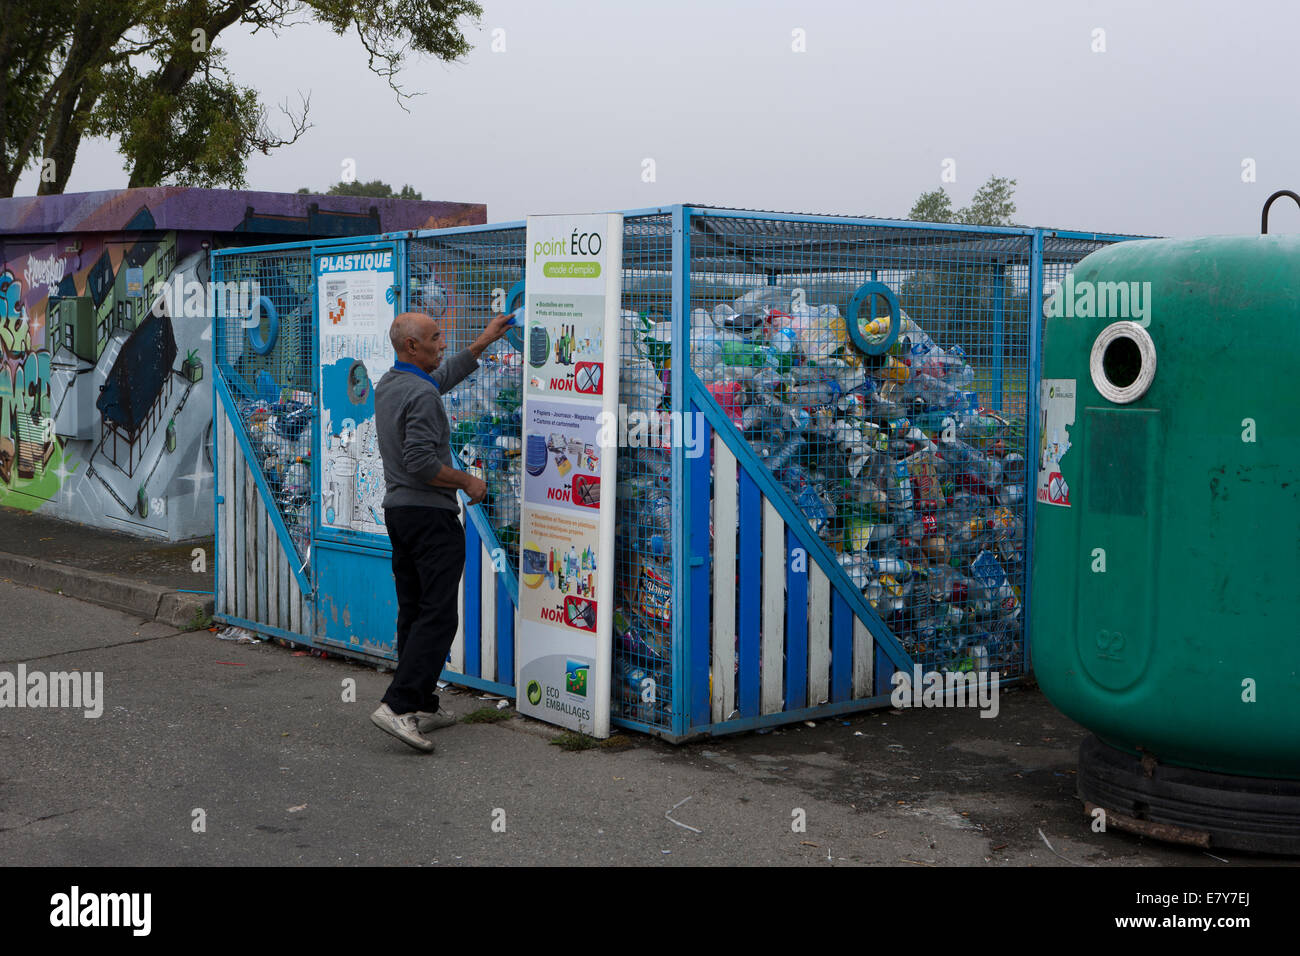 Recycling containers in a Car Park in the town of Plouescat, Brittany, France Stock Photo